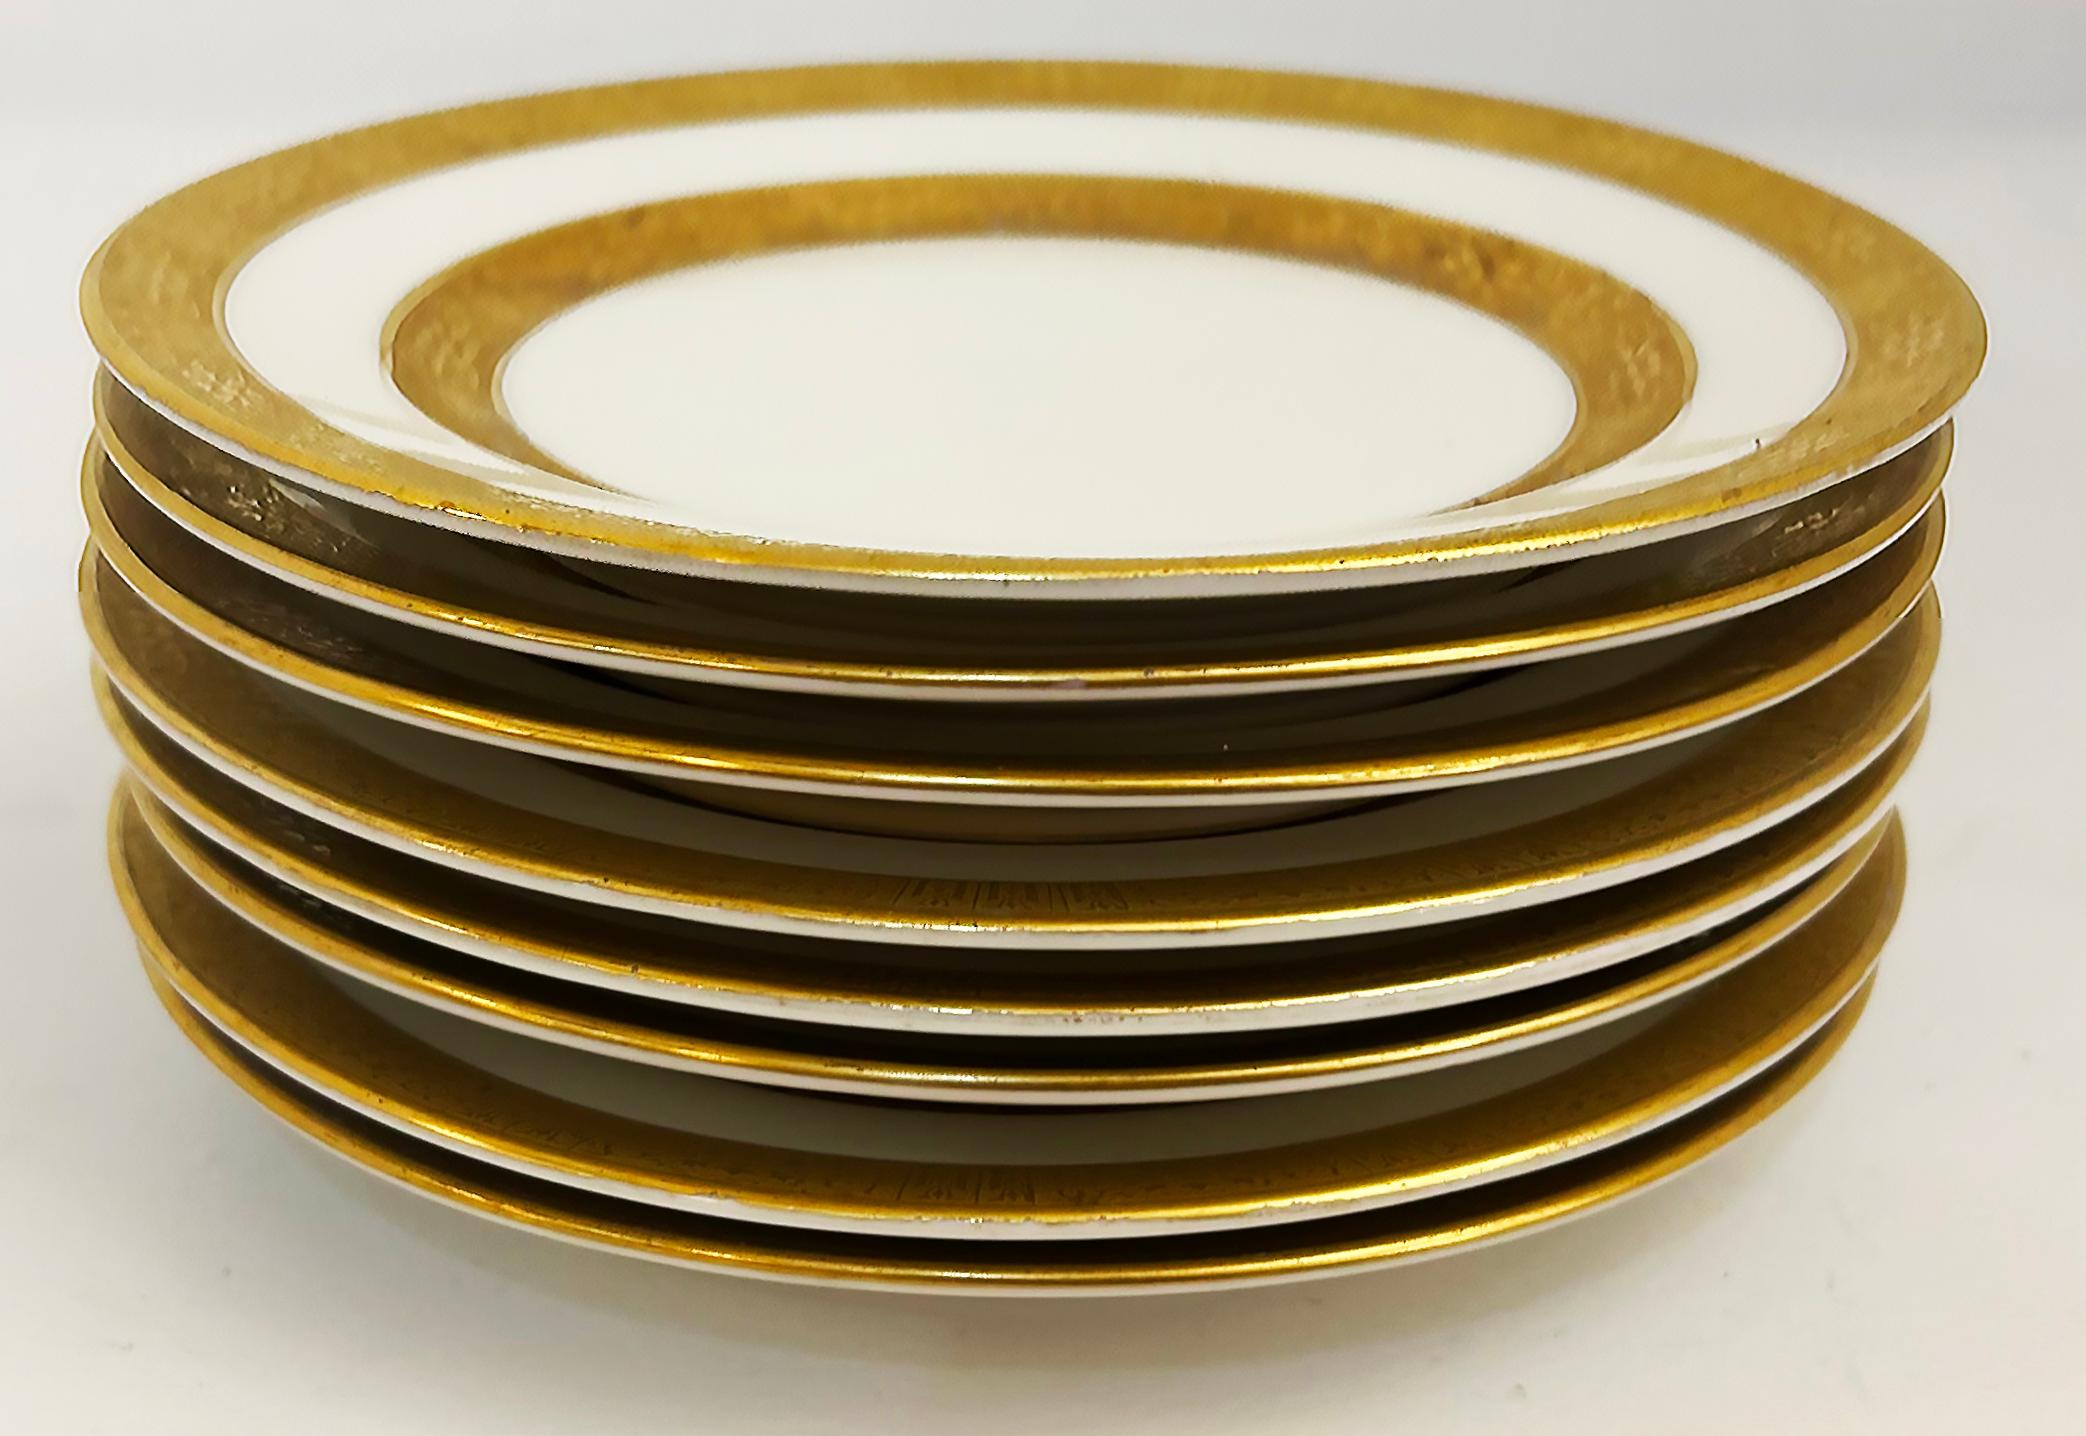 Limoges Gilt Banded Porcelain Plates Retailed by Stern Brothers NY Set of 8

Offered for sale is a set of eight gilt-banded Limoges plates with patterned gold on gold designs. The plates are marked Limoges and also Stern Brothers on the bases.